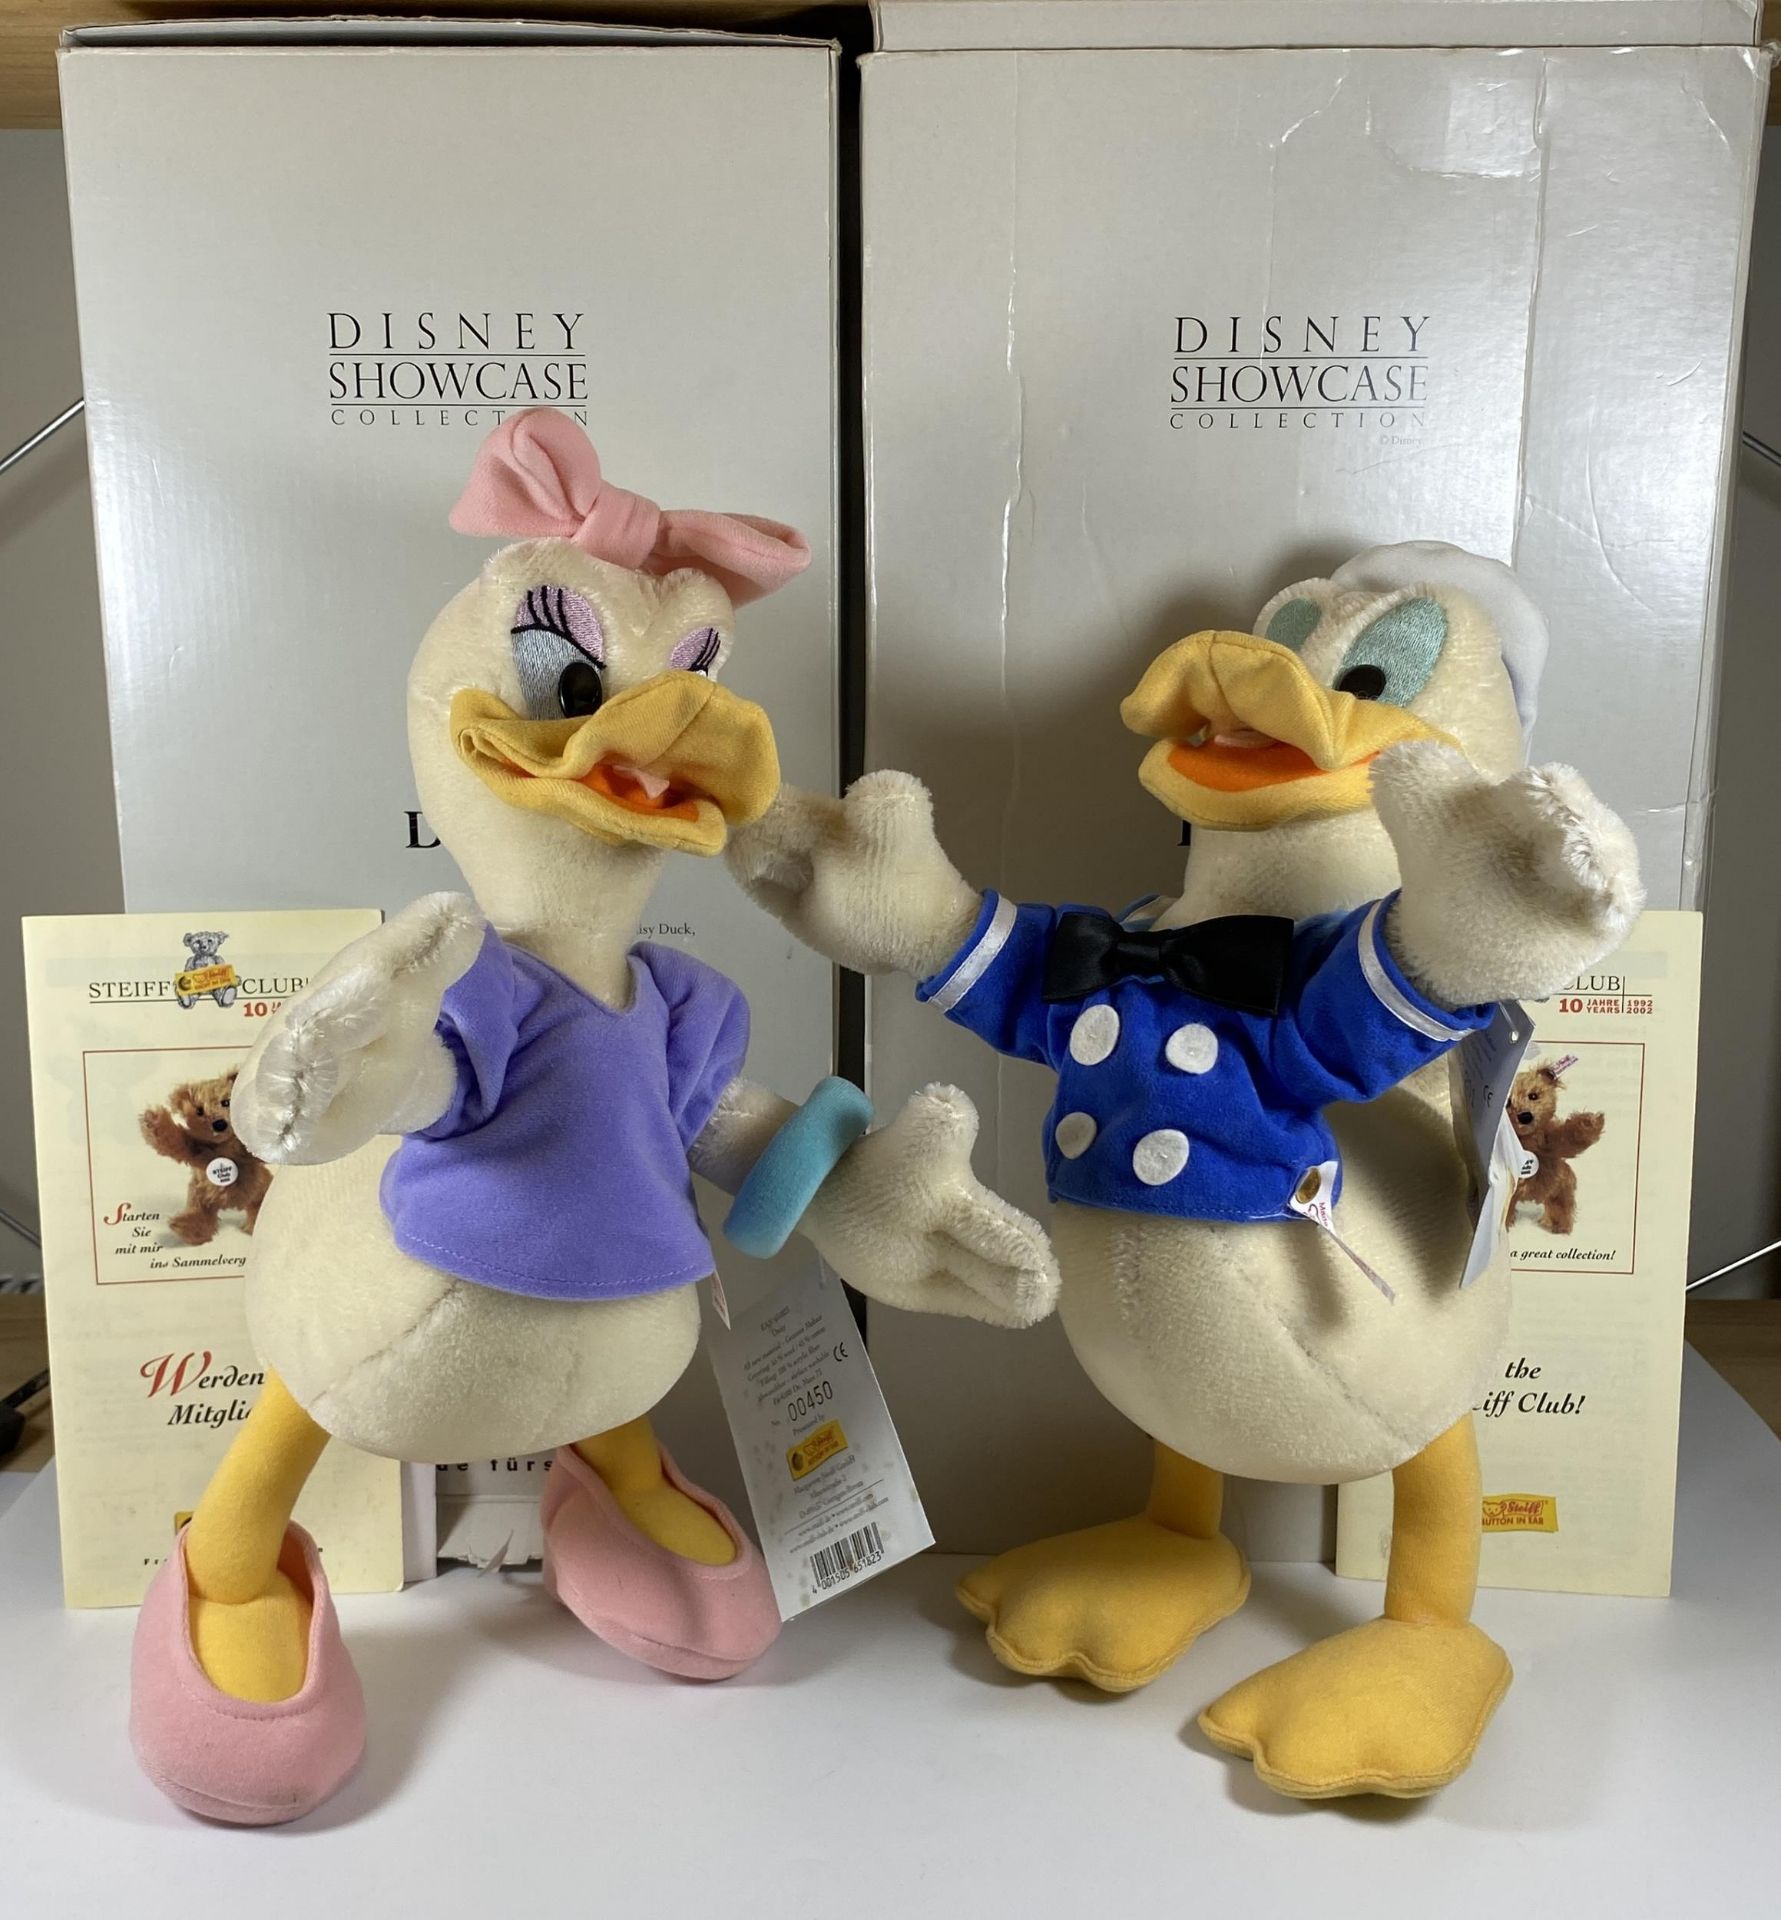 A PAIR OF LIMITED EDITION STEIFF MOHAIR DISNEY SHOWCASE COLLECTION SOFT TOY FIGURES, BOTH BOXED